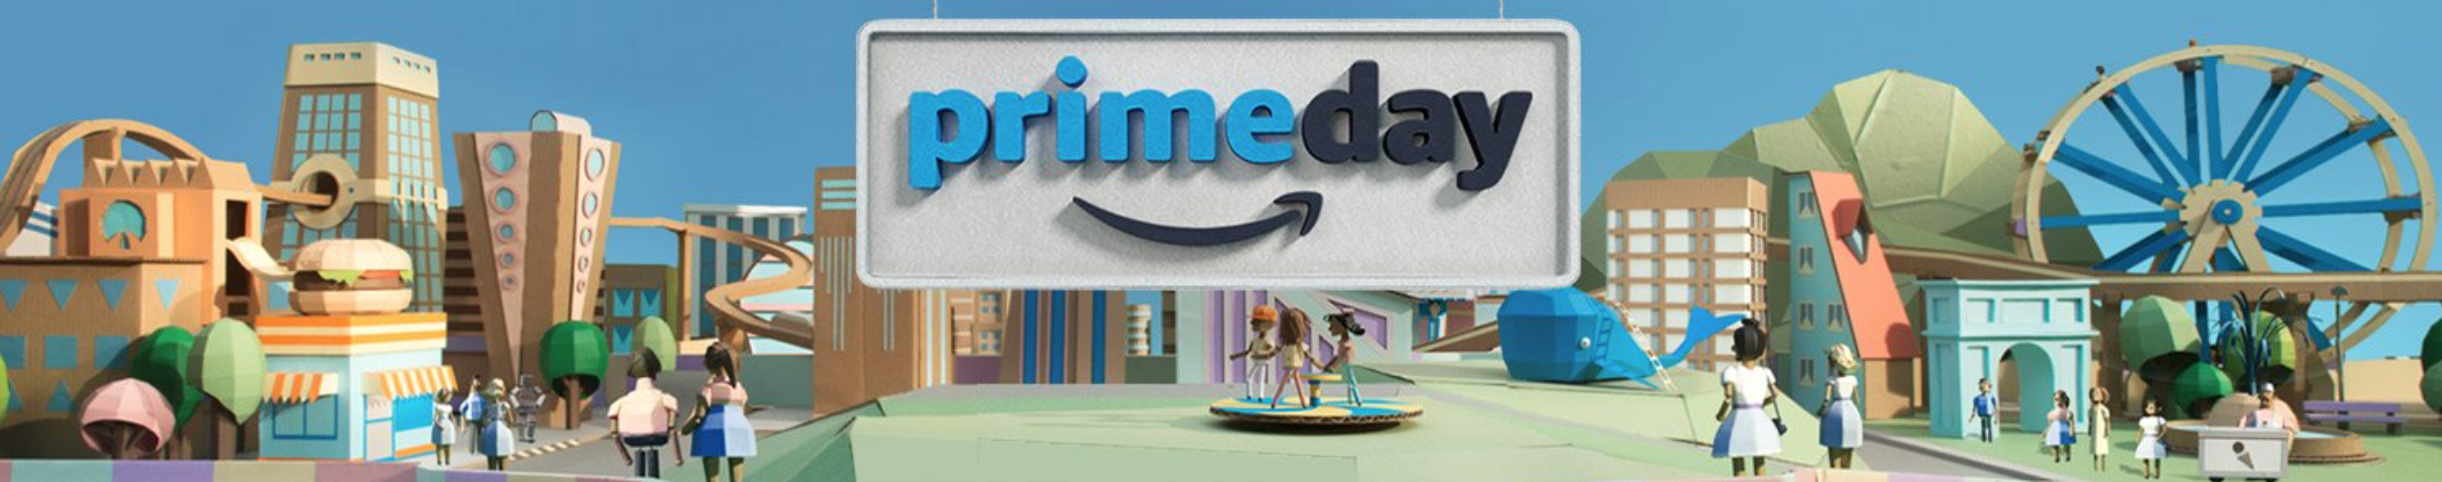 Amazon Prime Day Offers Deals on Apple Watch Sport and More